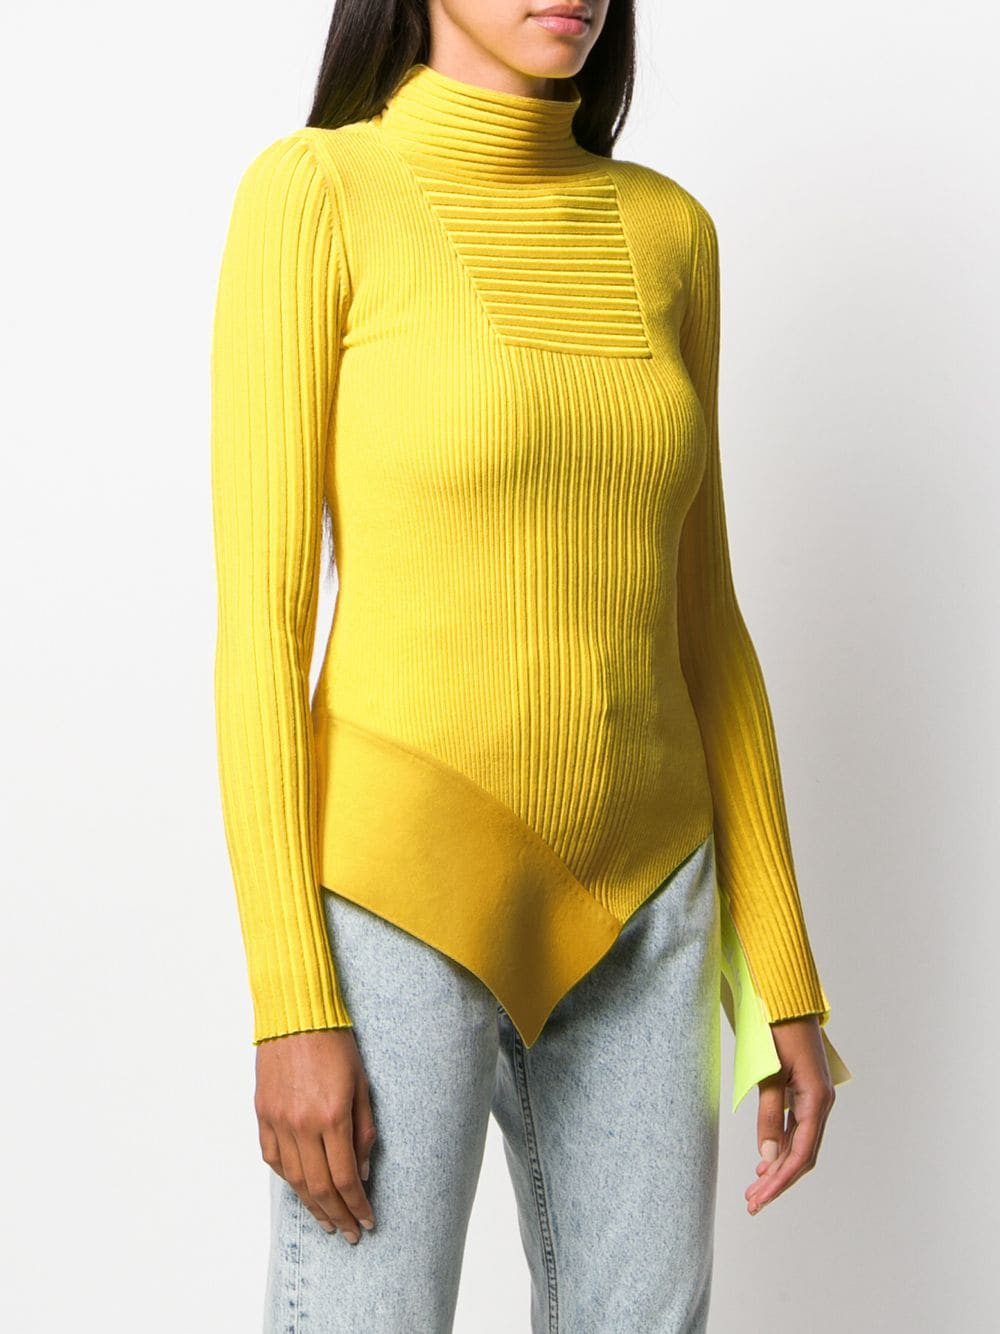 Off-White Asymmetric Knitted Top - Farfetch